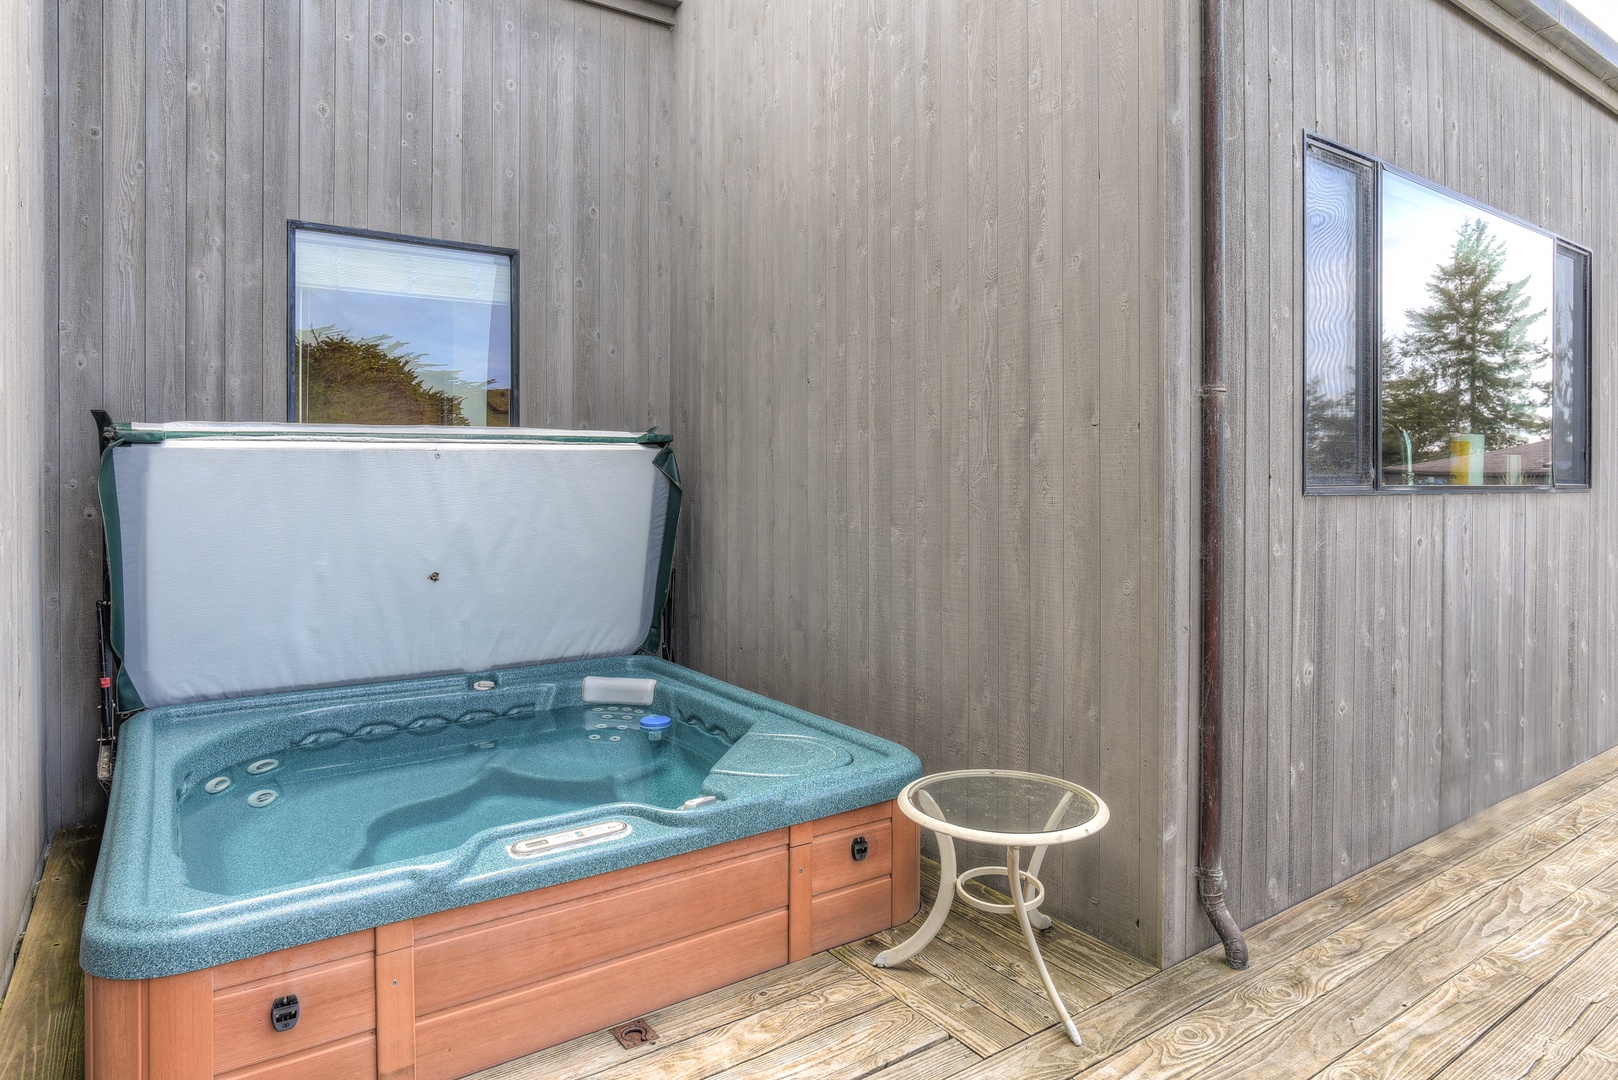 Relax and unwind in luxury with our private hot tub